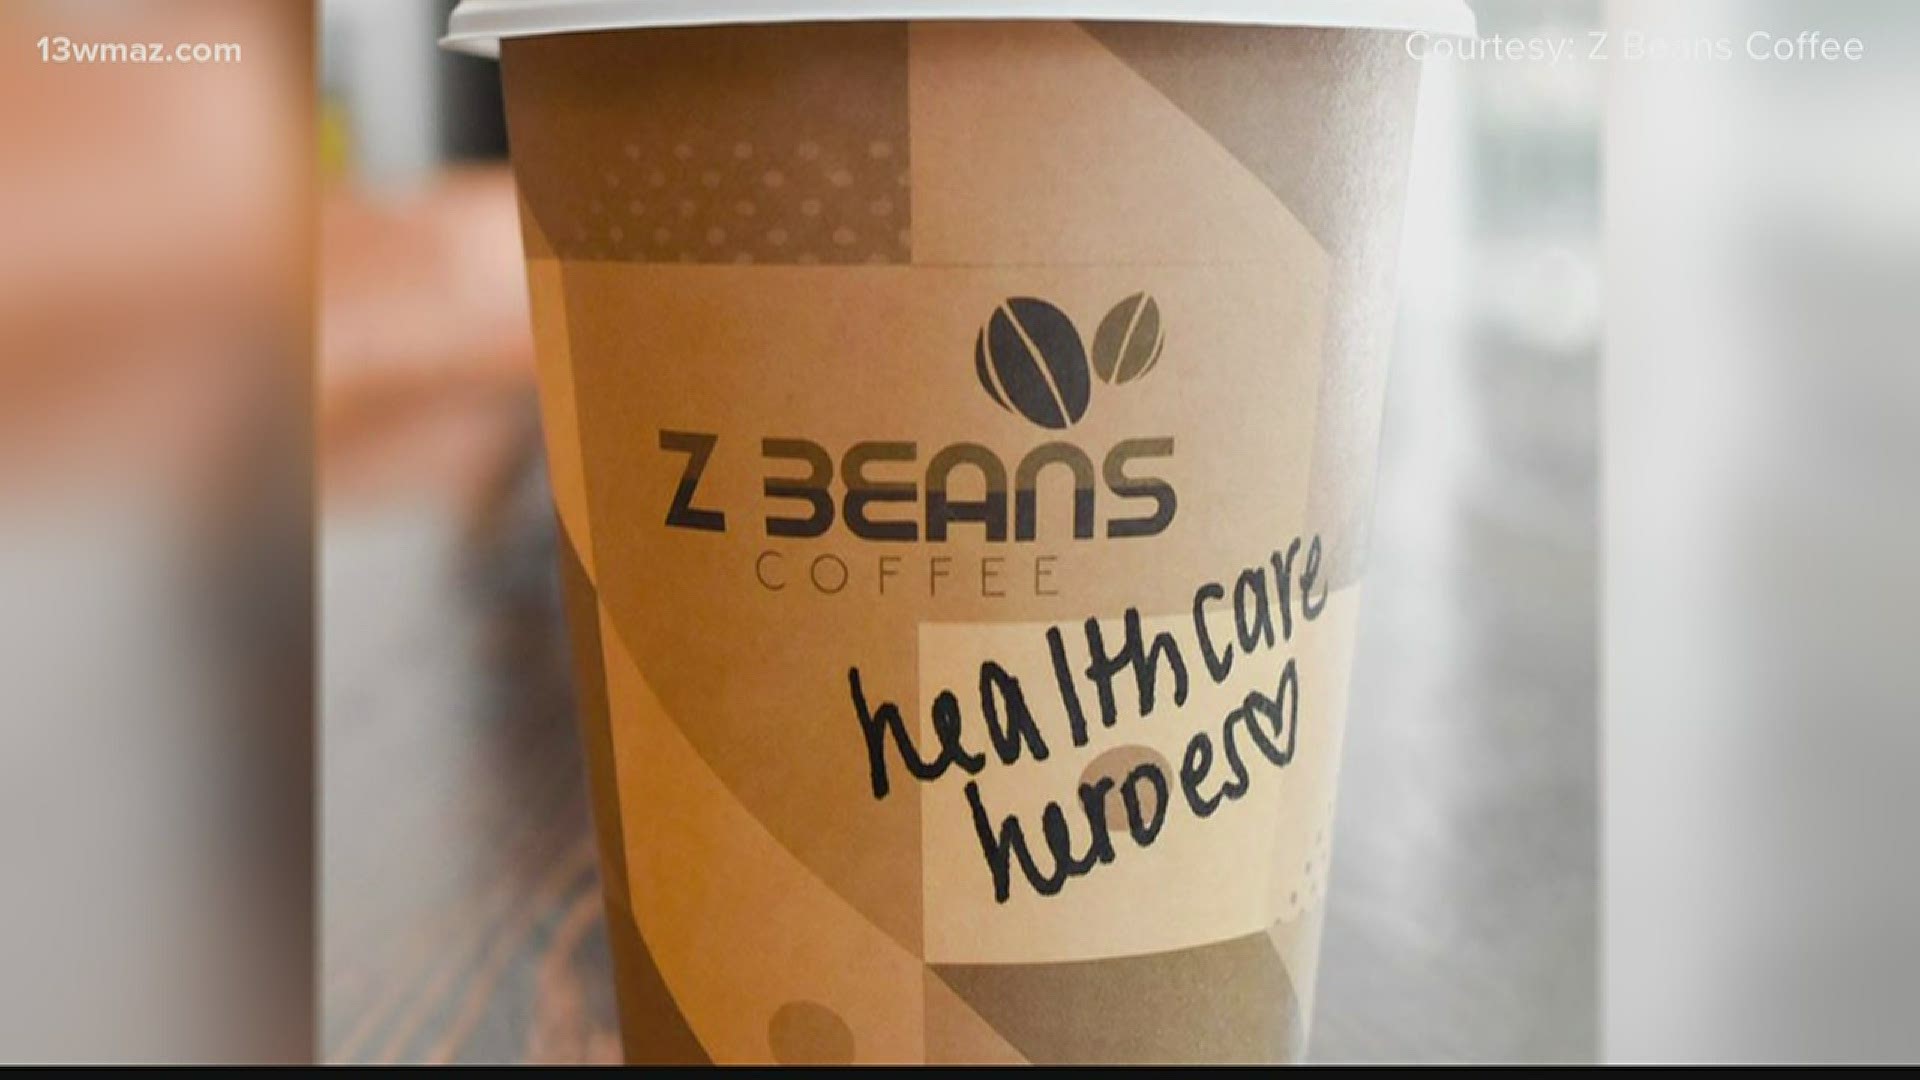 For those of you missing your caffeine fix, Z Beans Coffee is still open for business.